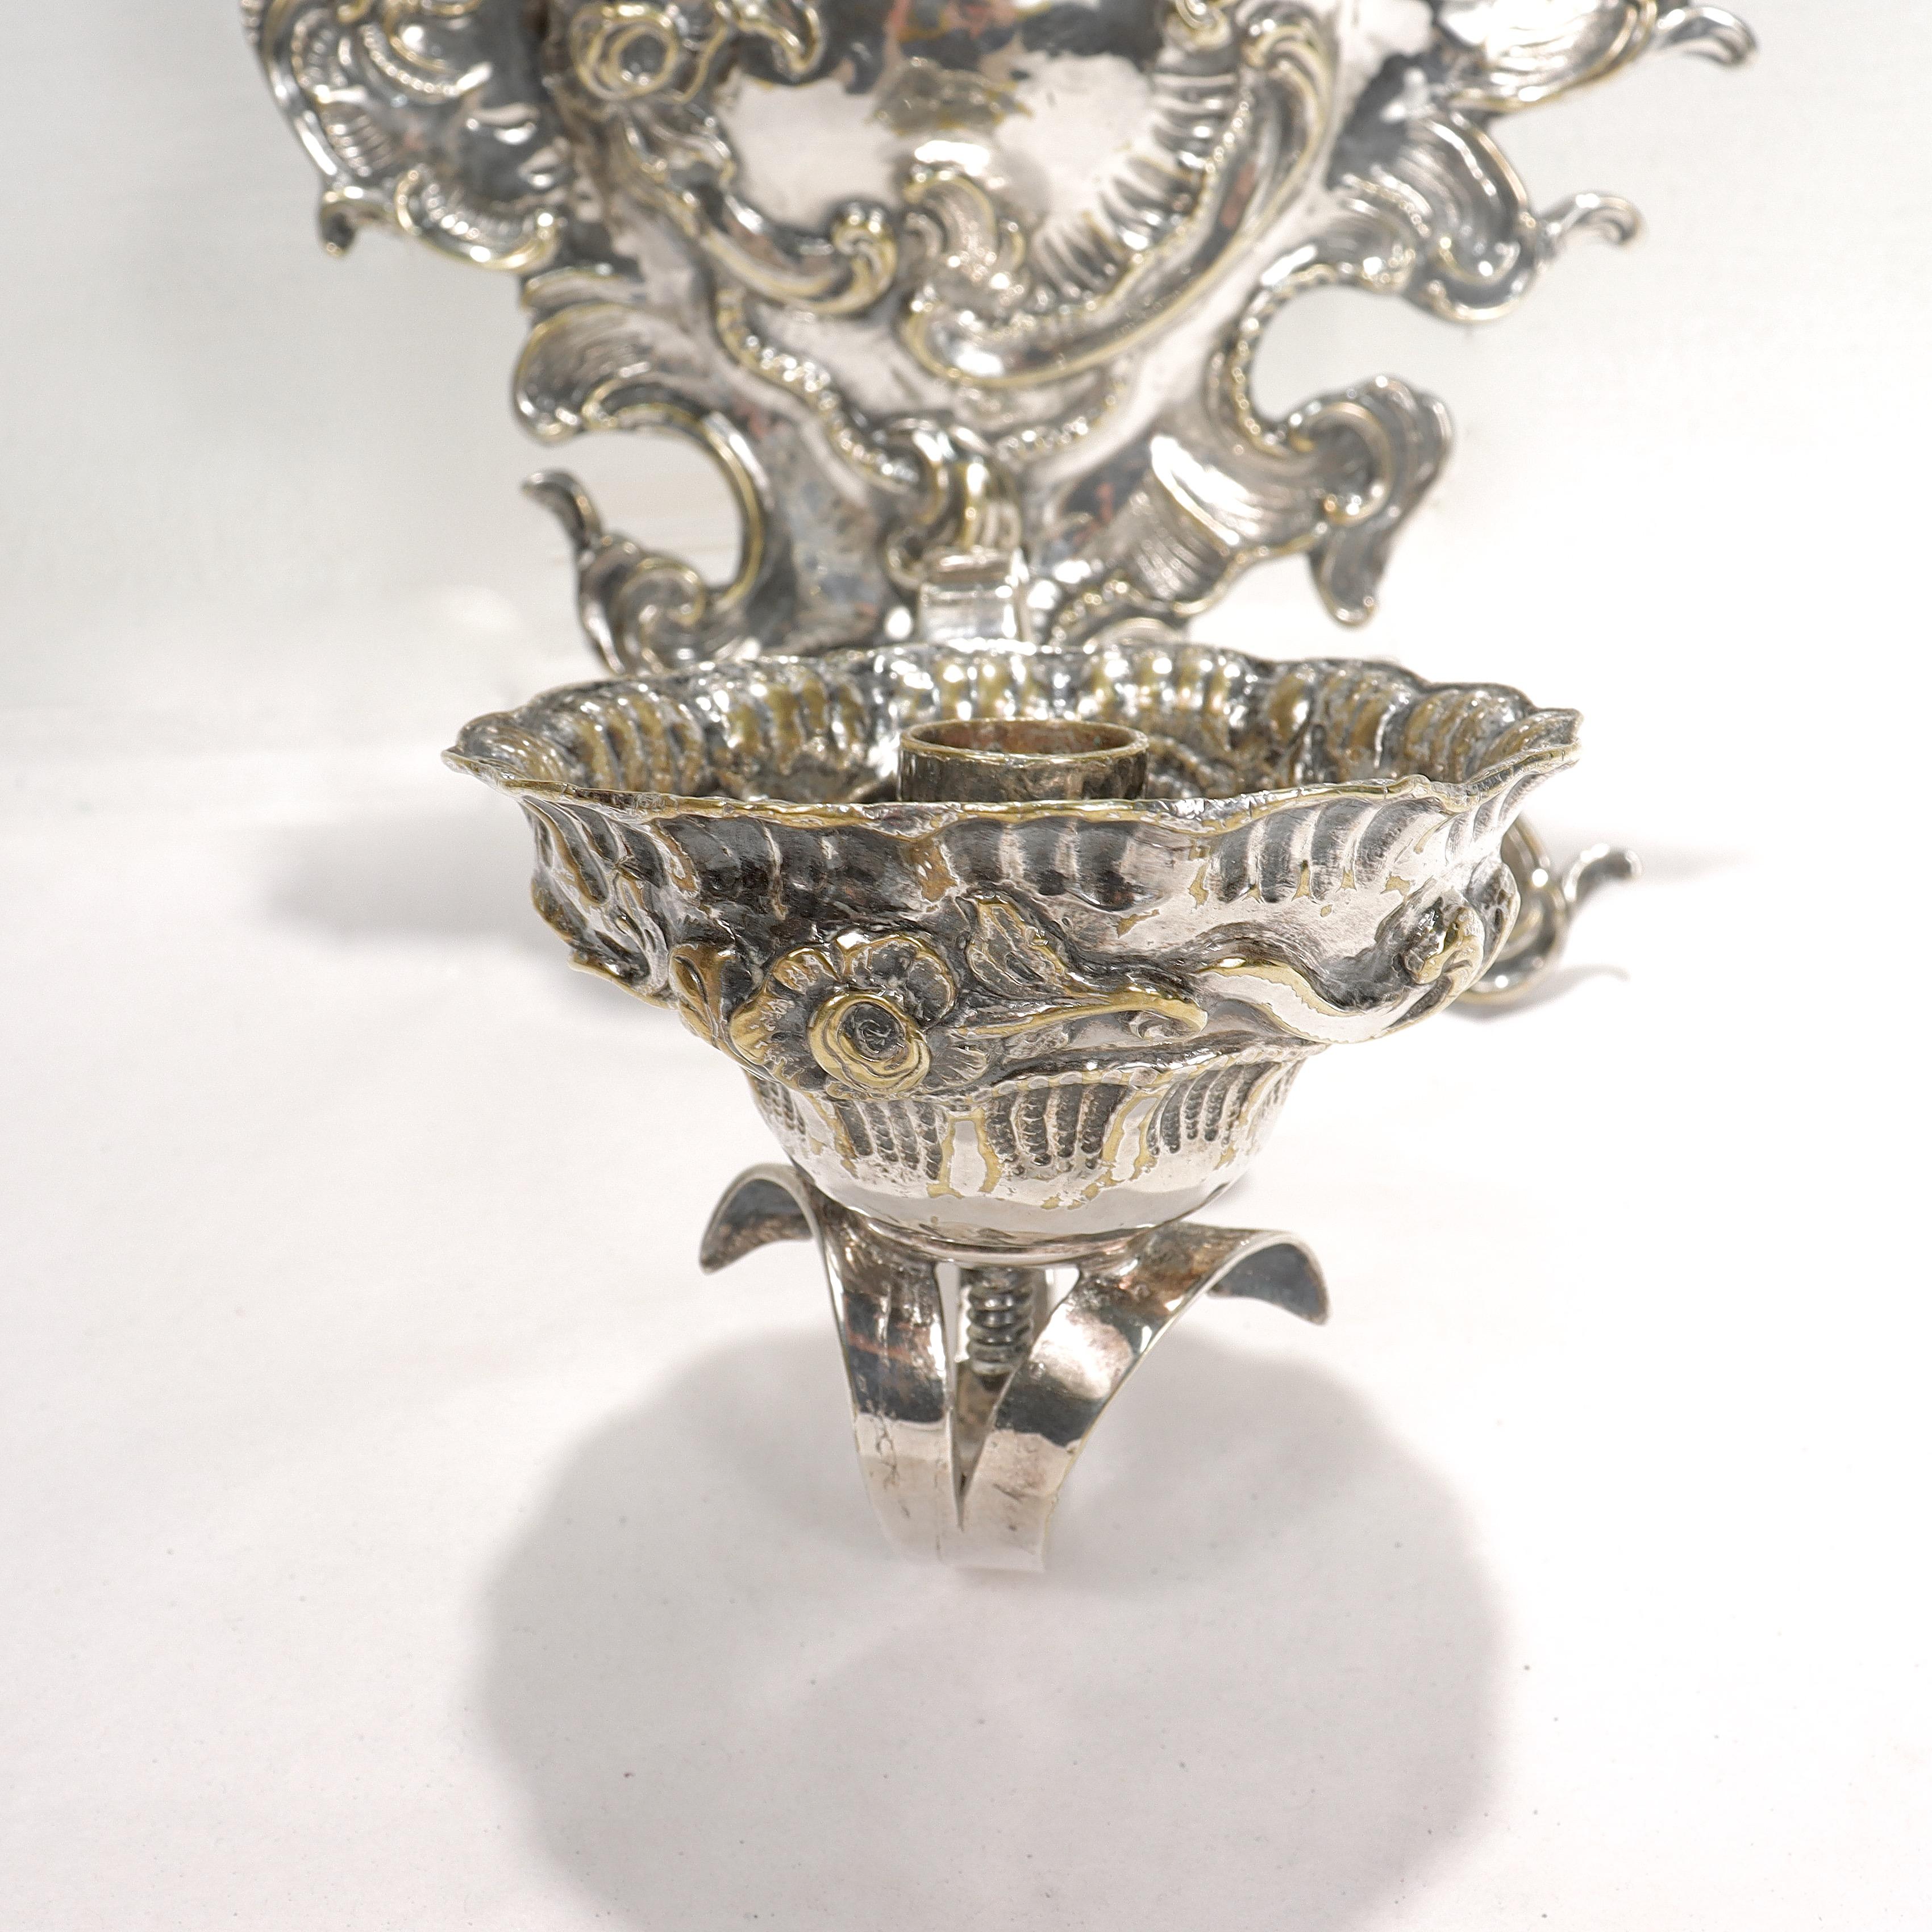 Antique Rococo or Rococo Revival Silver Plated Wall Sconces For Sale 6